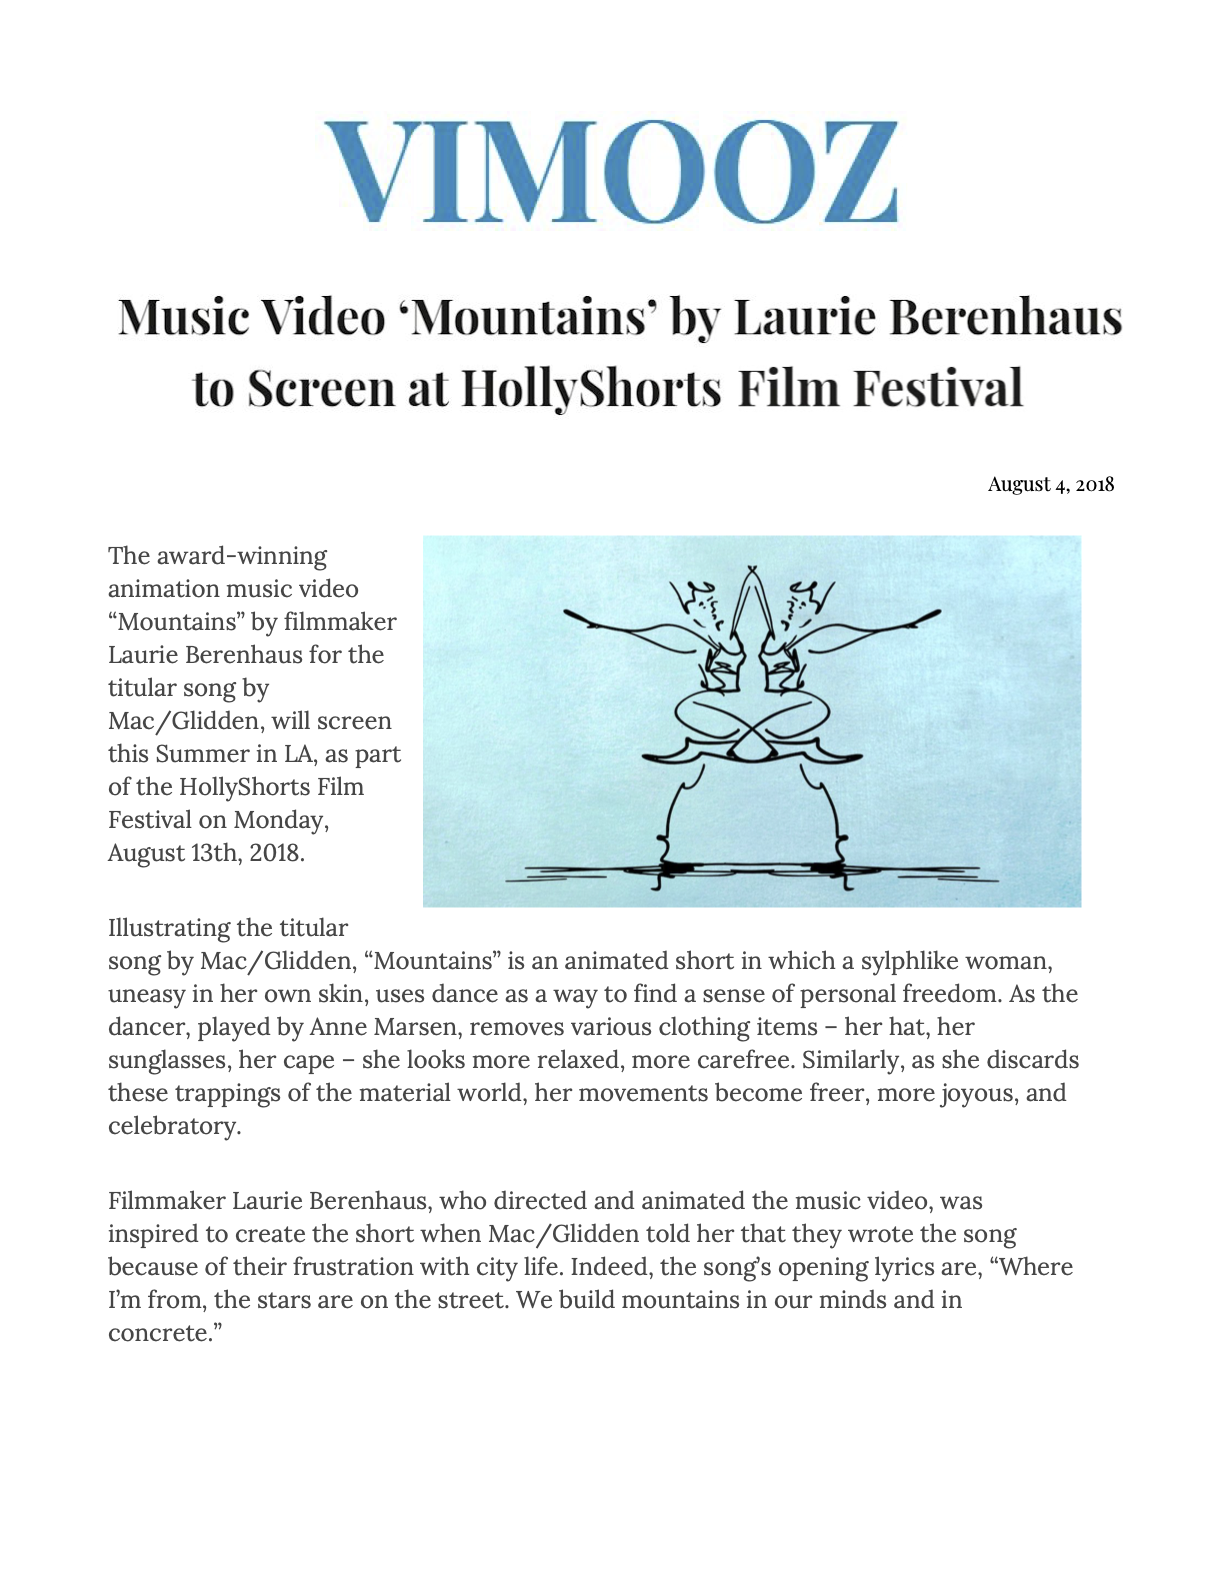 Music Video 'Mountains' by Laurie Berenhaus to Screen at Holllyshorts Film Festival, August 2018